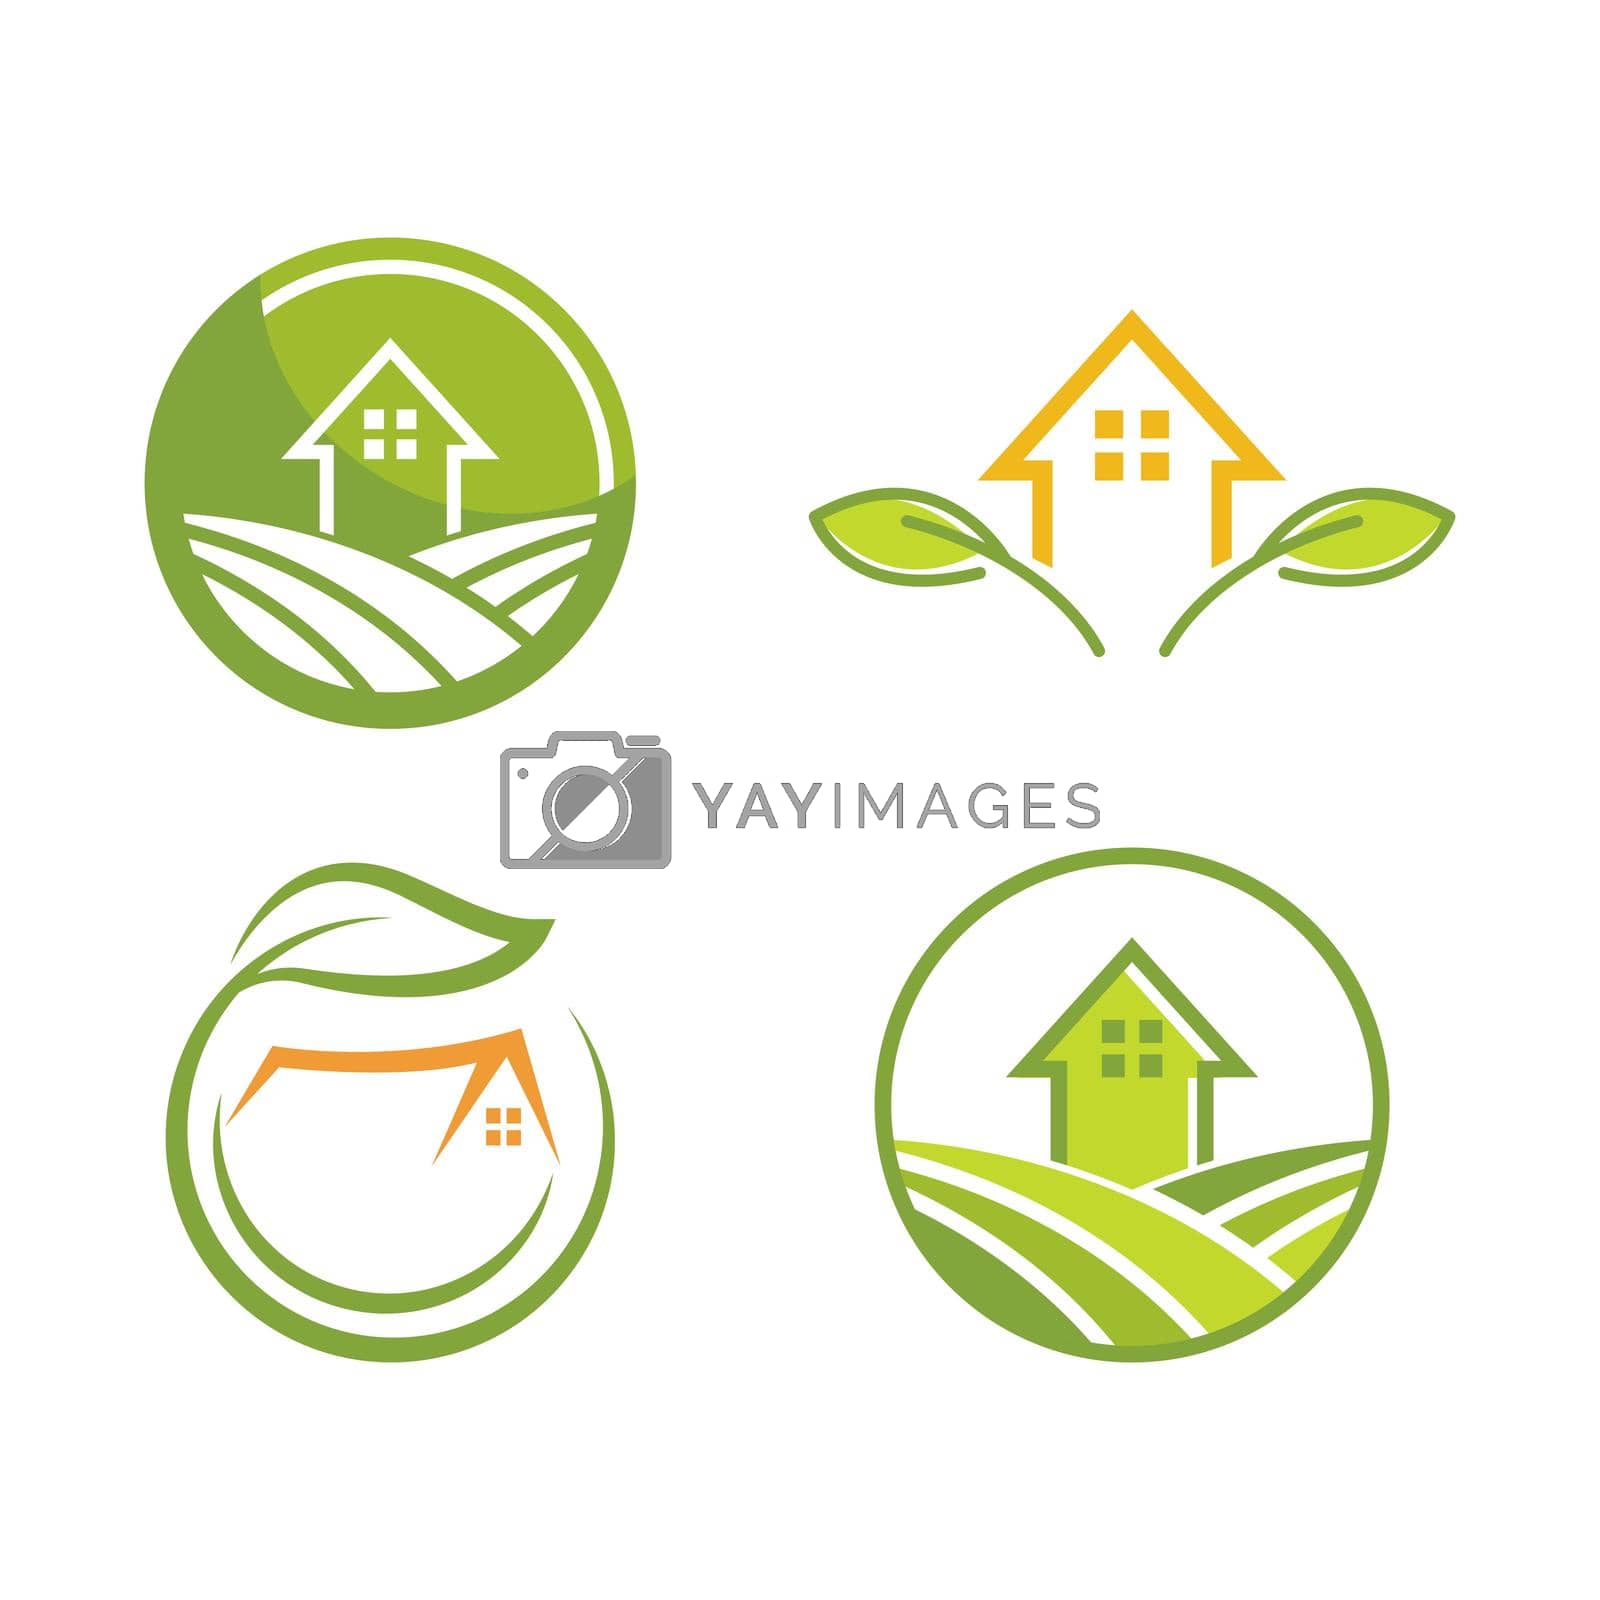 Royalty free image of Farm house logo by awk